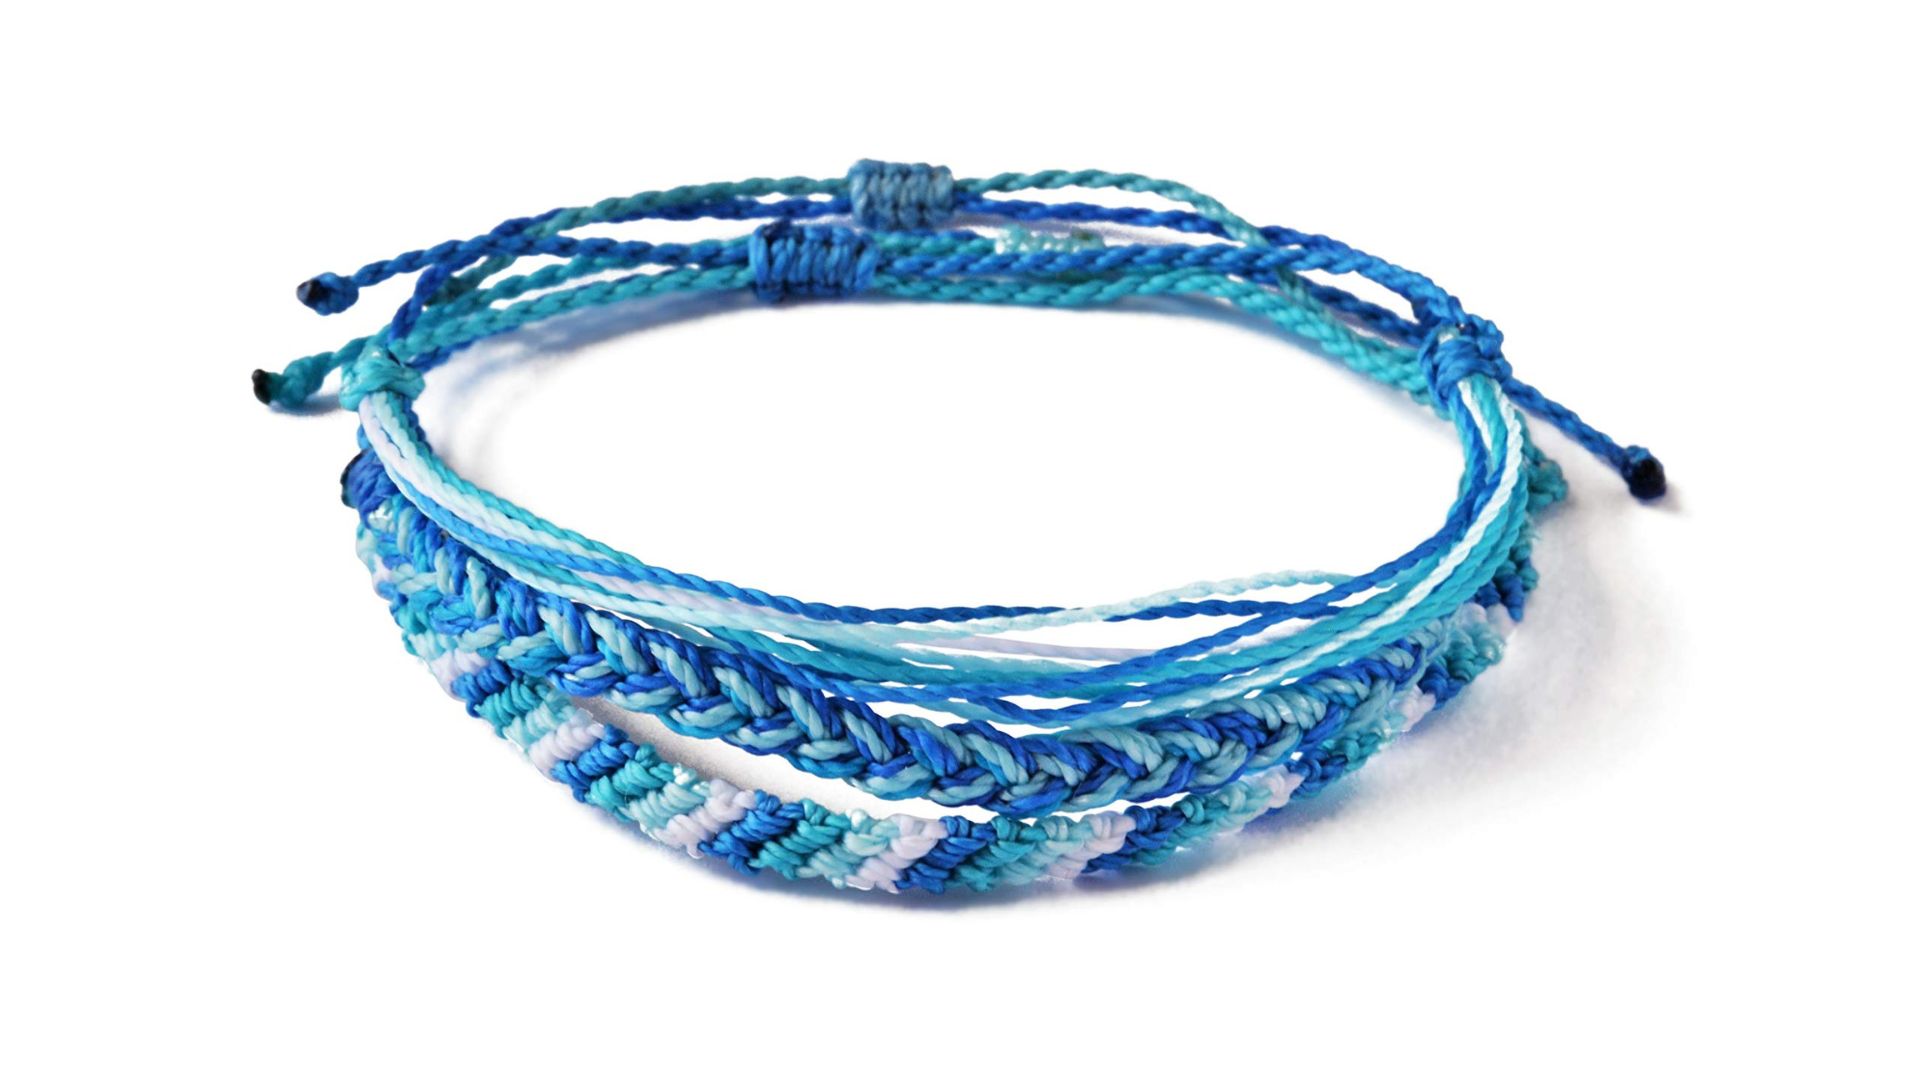 Braided Bracelets - A Popular Accessory For Centuries